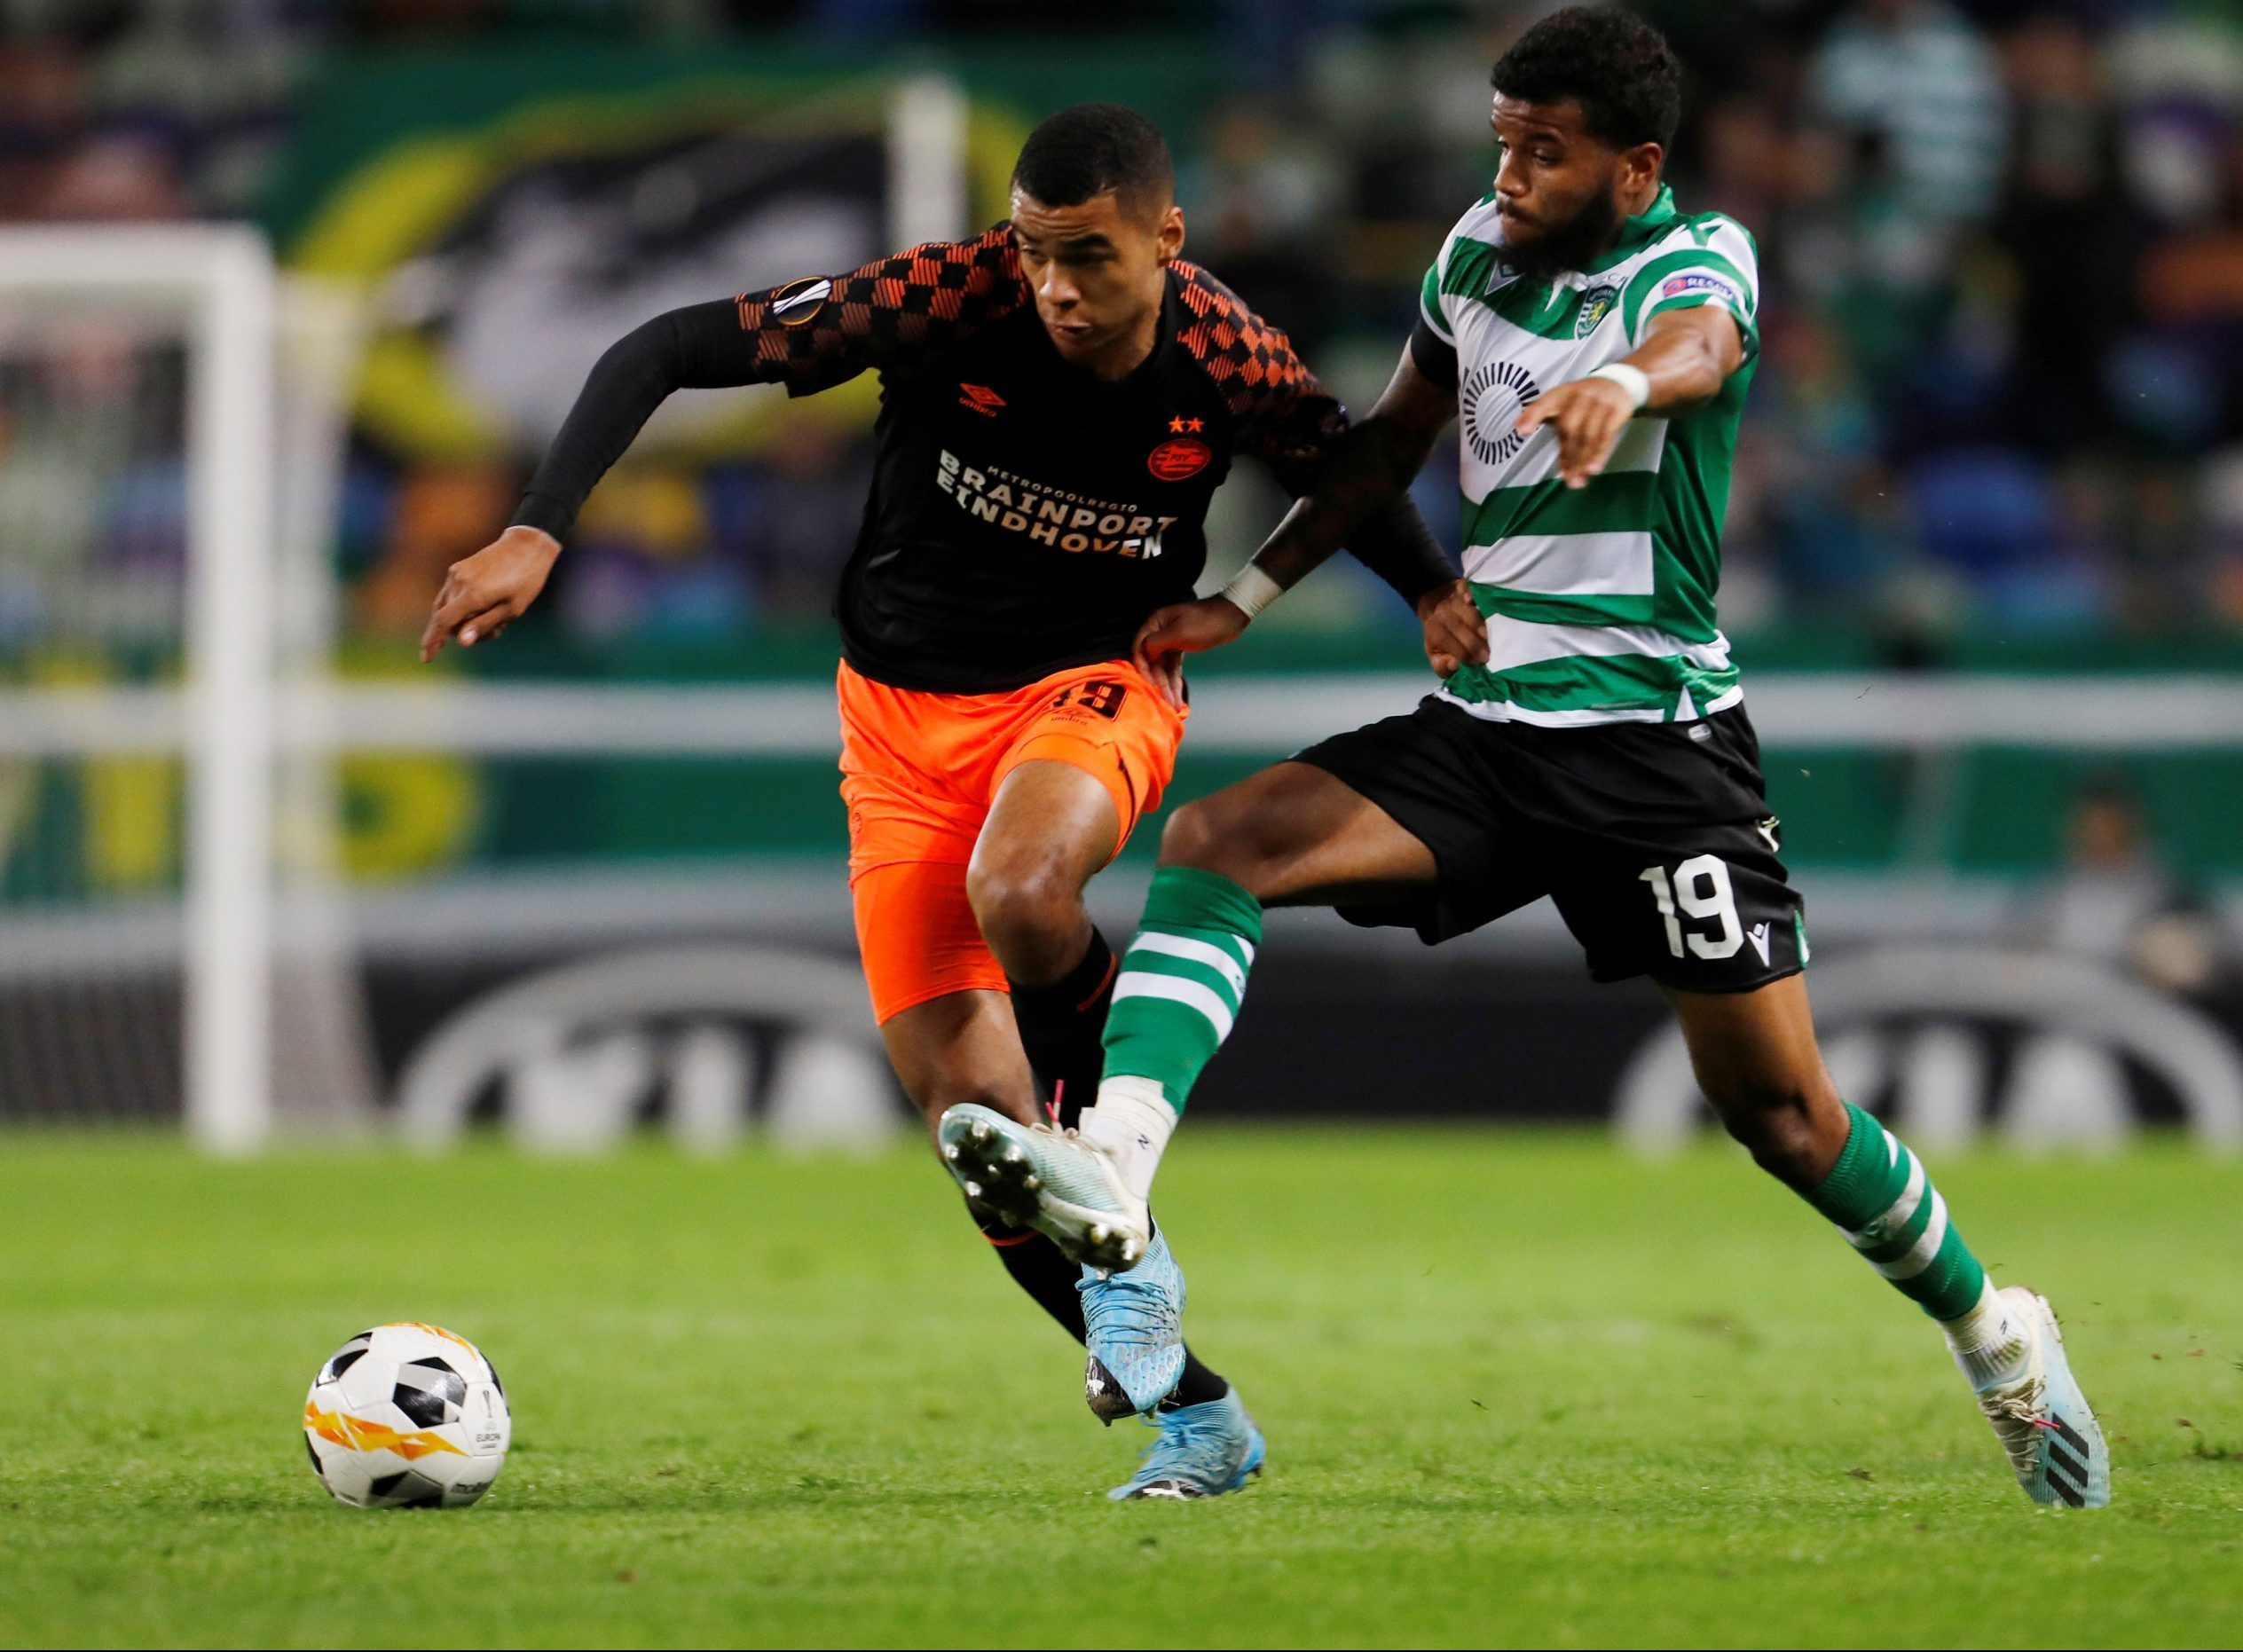 PSV Eindhoven's Cody Gakpo in action with Sporting's Valentin Rosier